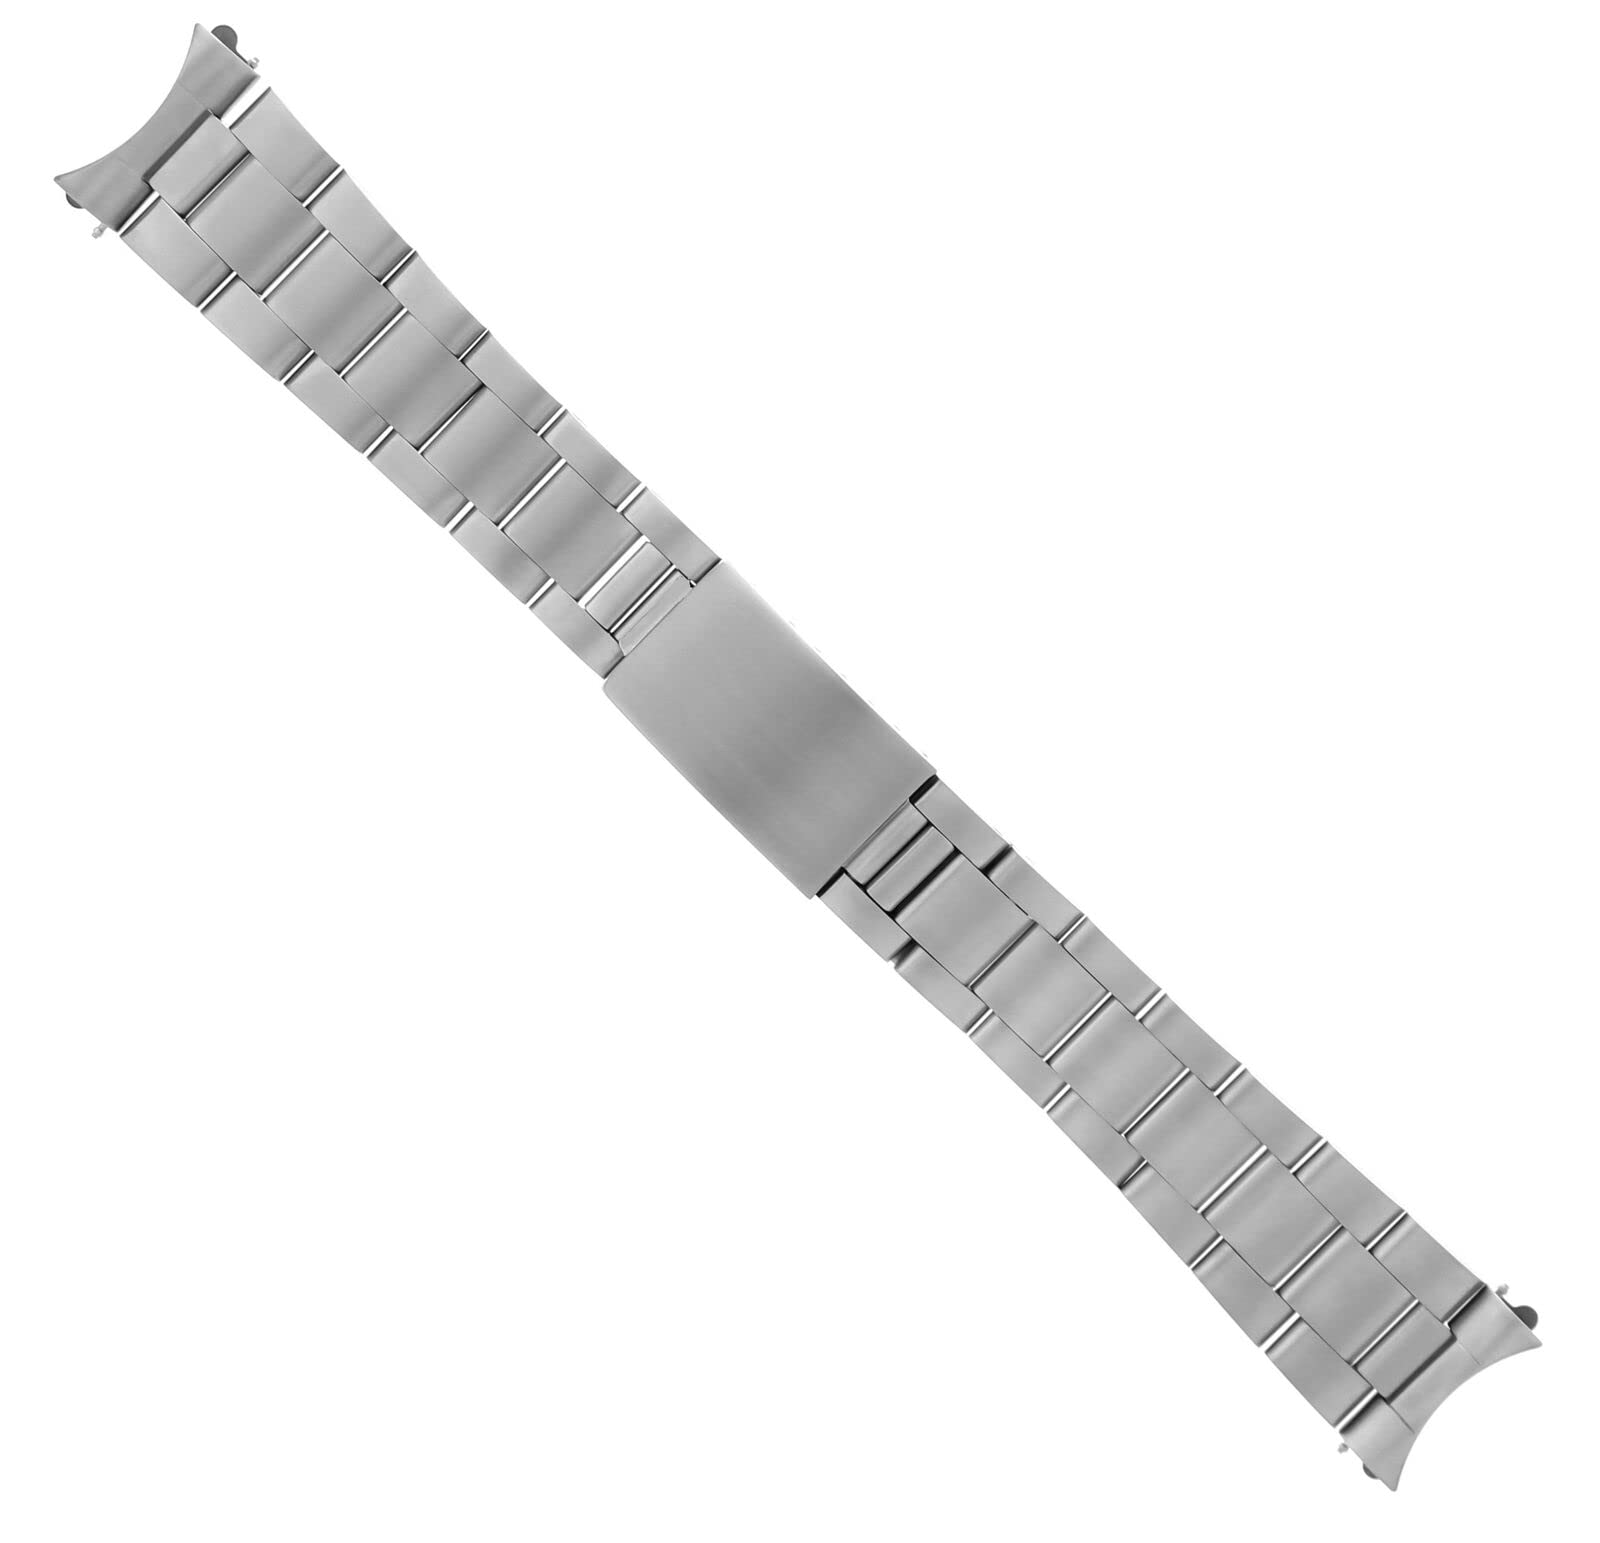 Ewatchparts OYSTER WATCH BAND BRACELET COMPATIBLE WITH ROLEX DATE 1501-1502 5500 MATTE 19MM HEAVY STEEL